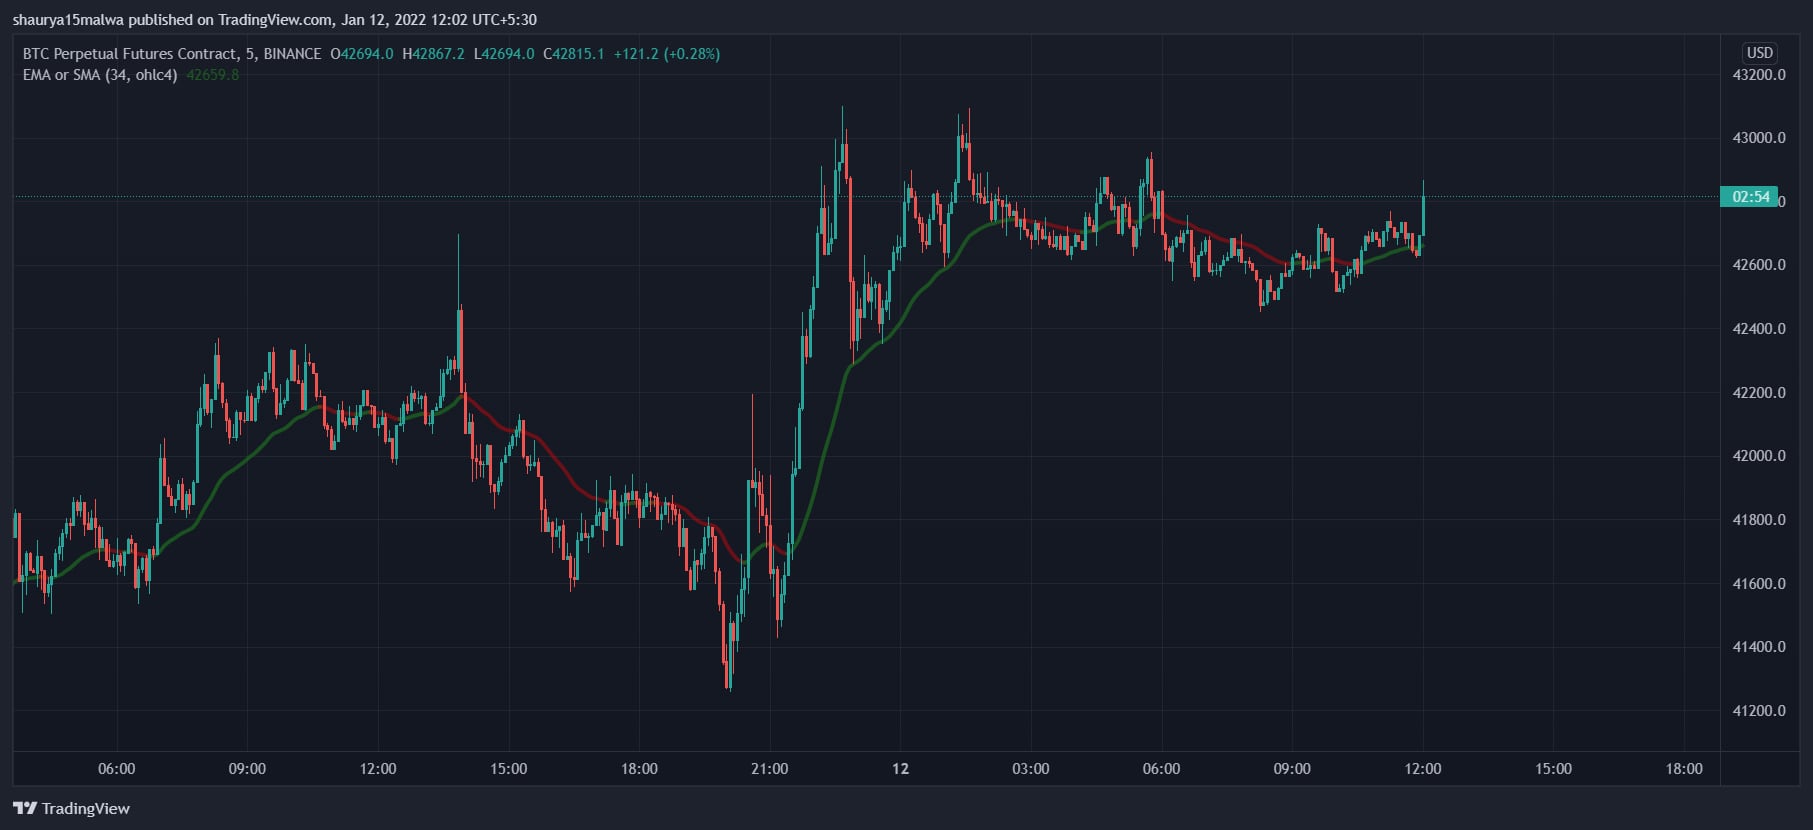 Bitcoin prices spiked after comments from Fed chair Jerome Powell. (TradingView)